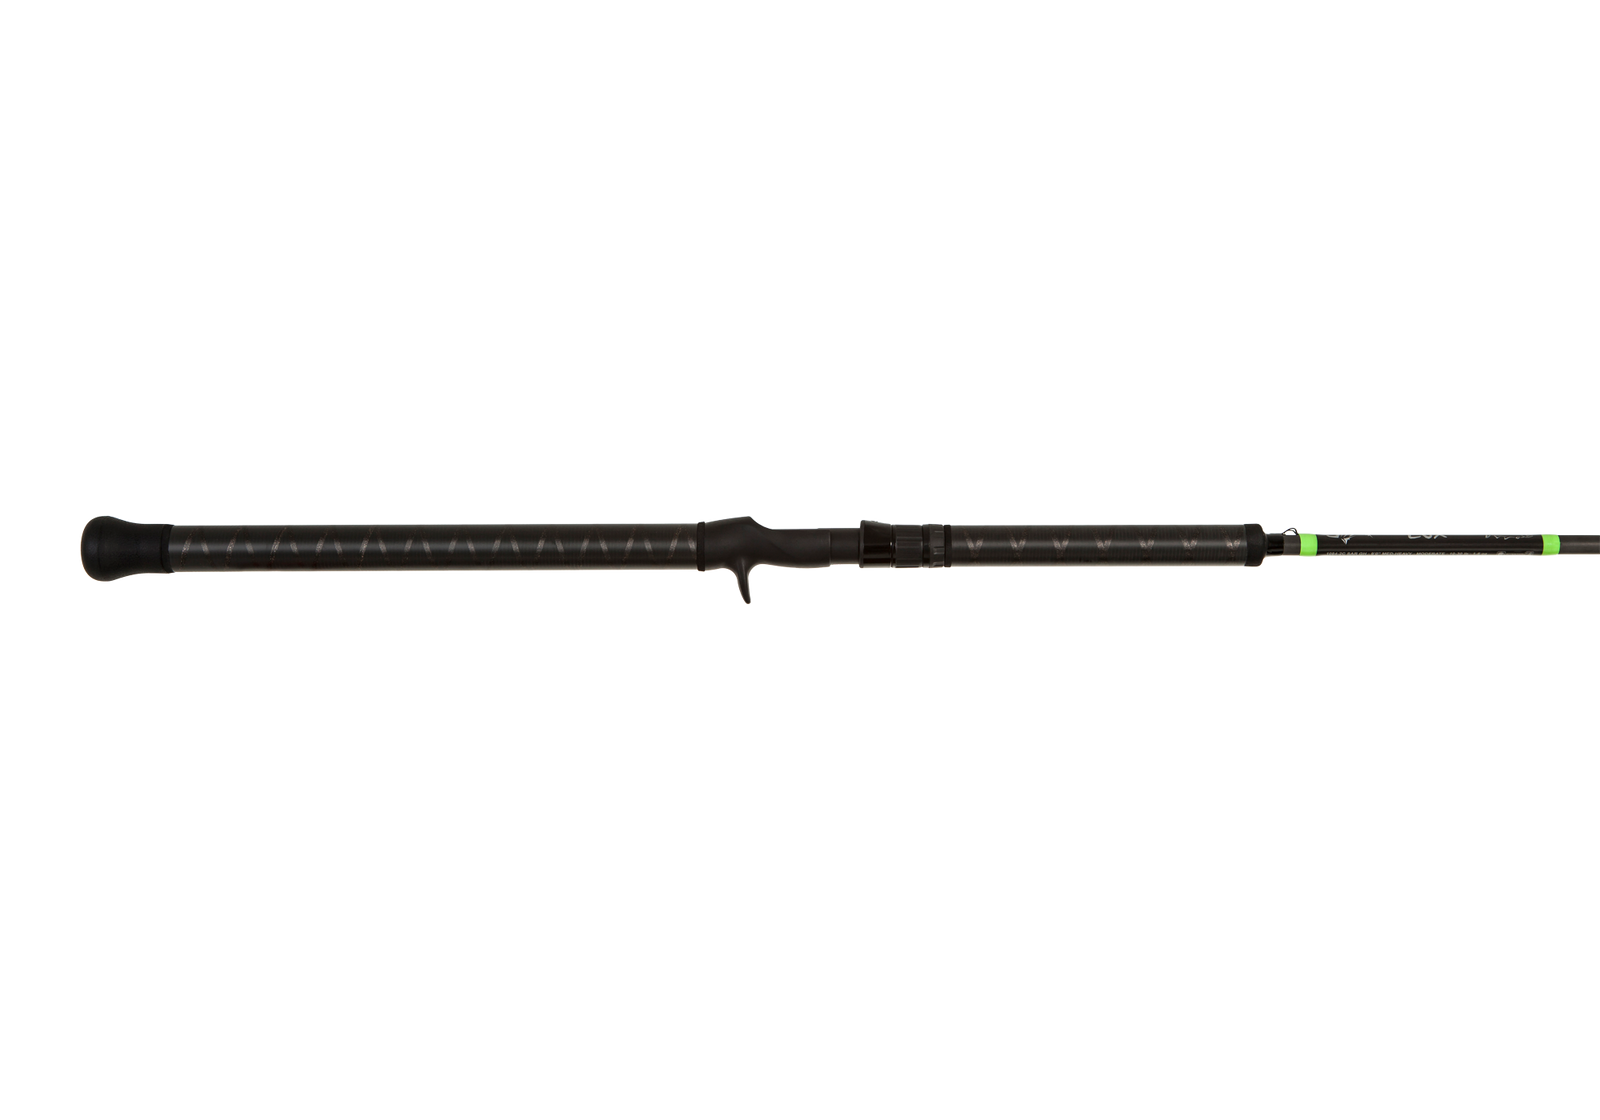 Rod Review: G.Loomis E6X